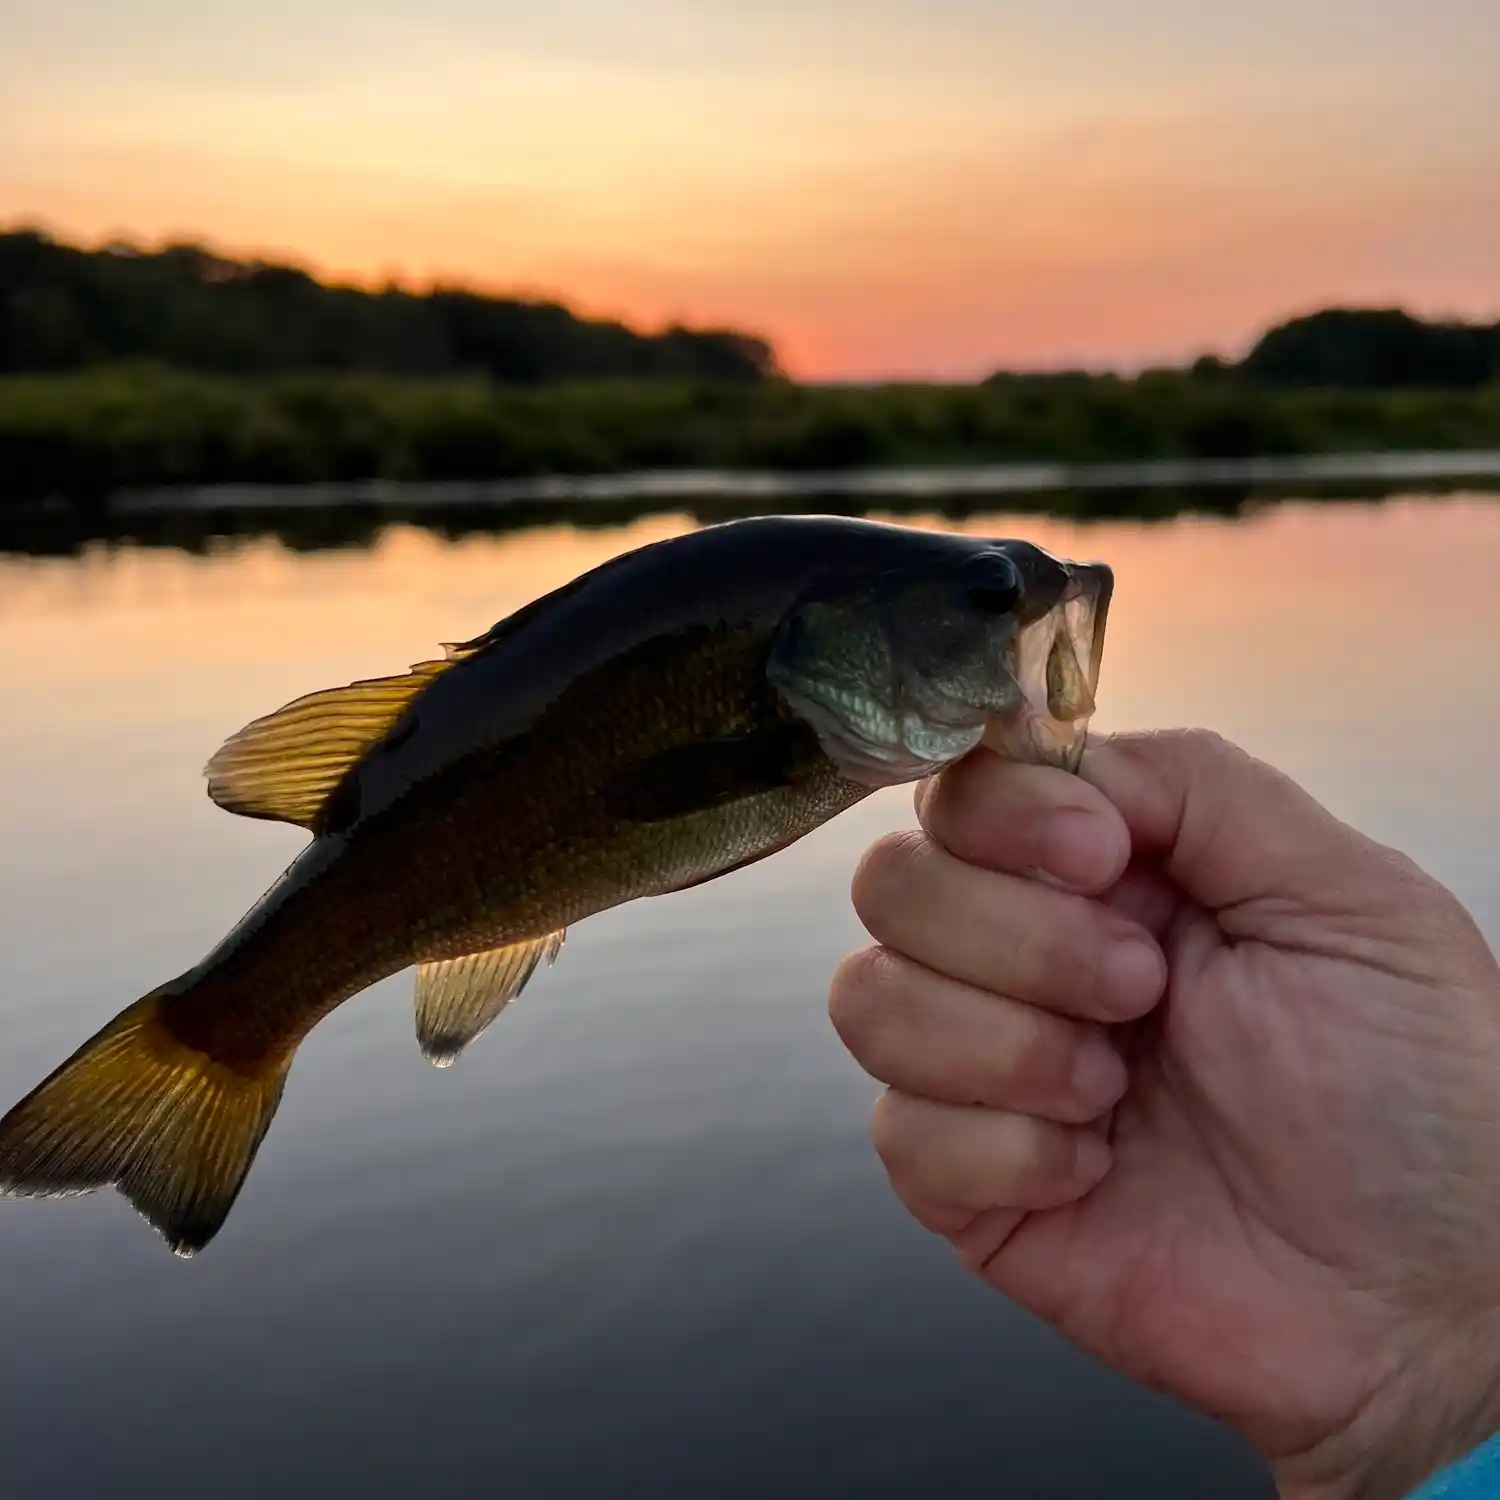 ᐅ Great Swamp fishing reports🎣• Spencer, MA (United States) fishing